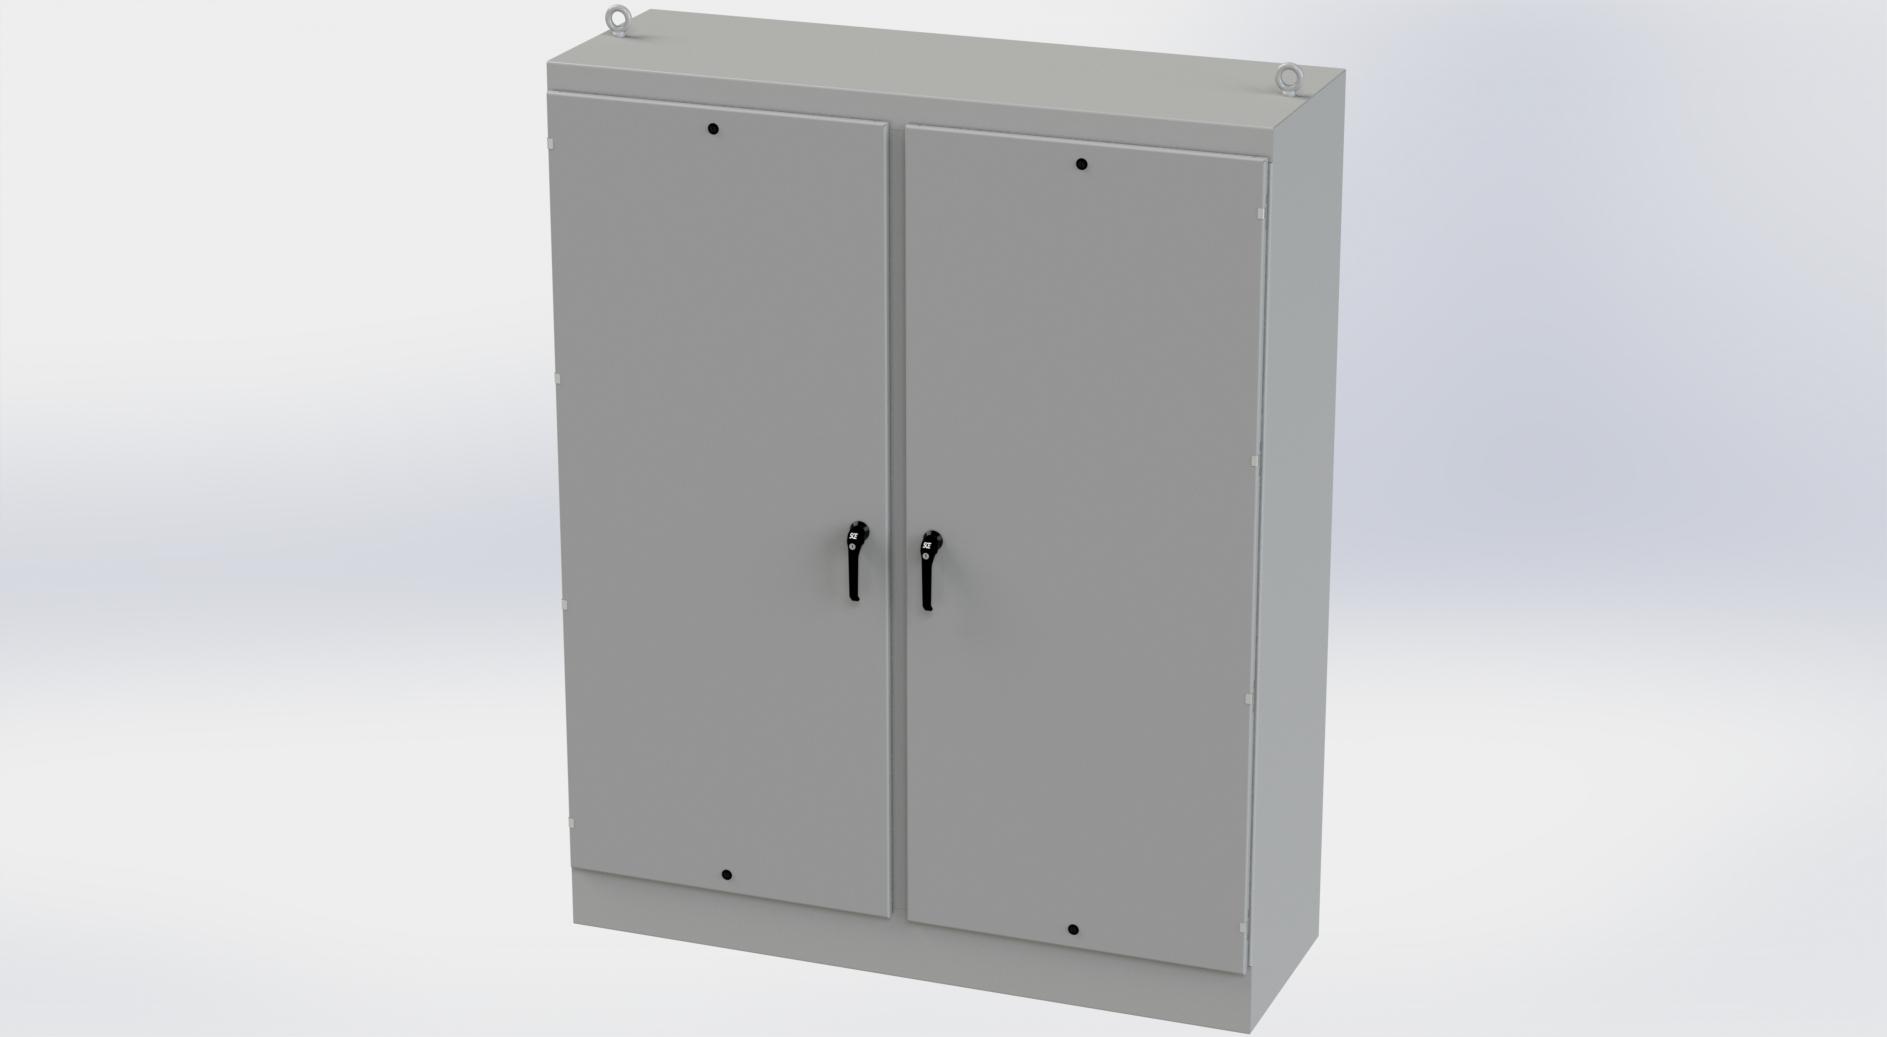 Saginaw Control SCE-90EL7224FSD EL FSD Enclosure, Height:90.00", Width:72.00", Depth:24.00", ANSI-61 gray finish Inside and outside. Optional sub-panels are powder coated white.